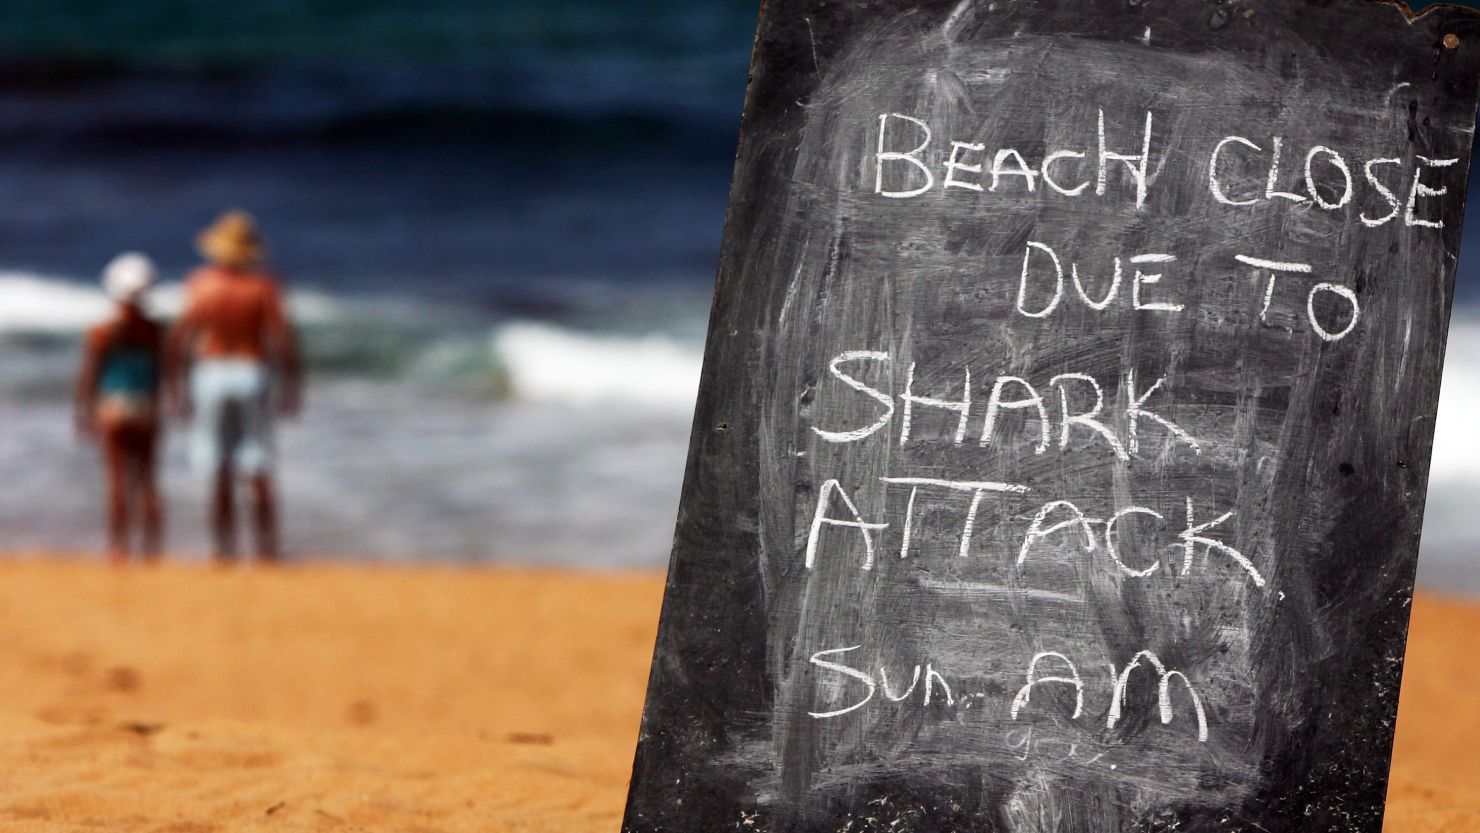 Sydney's Avalon Beach is pictured after a shark attack on a surfer on March 1, 2009.